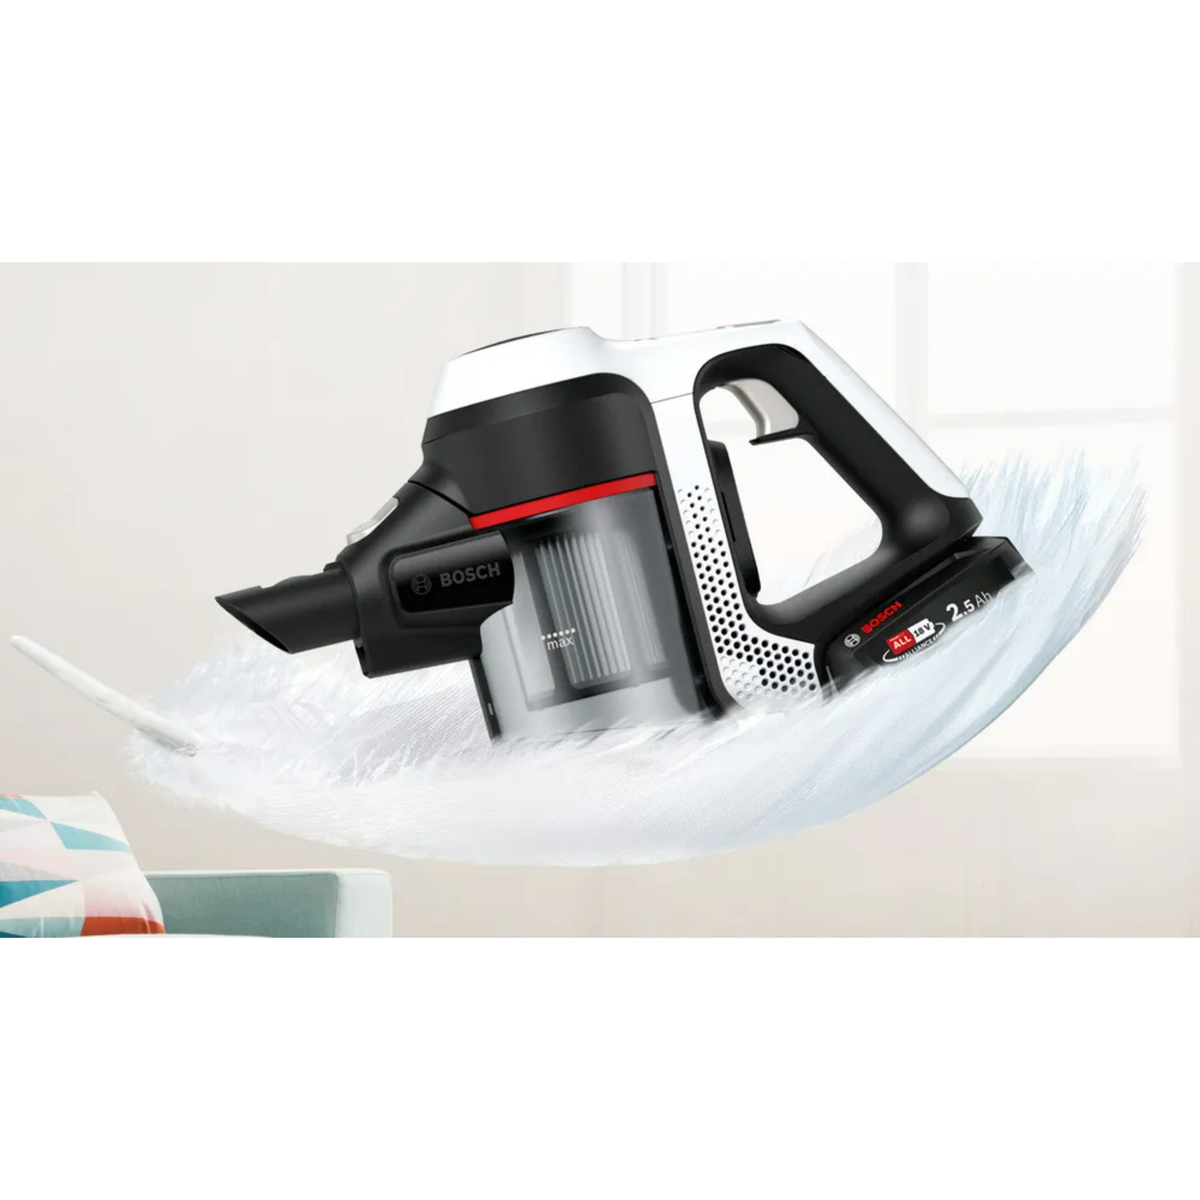 Bosch Series 6 Rechargeable Vacuum Cleaner, 18.0V, White, BCS612GB 